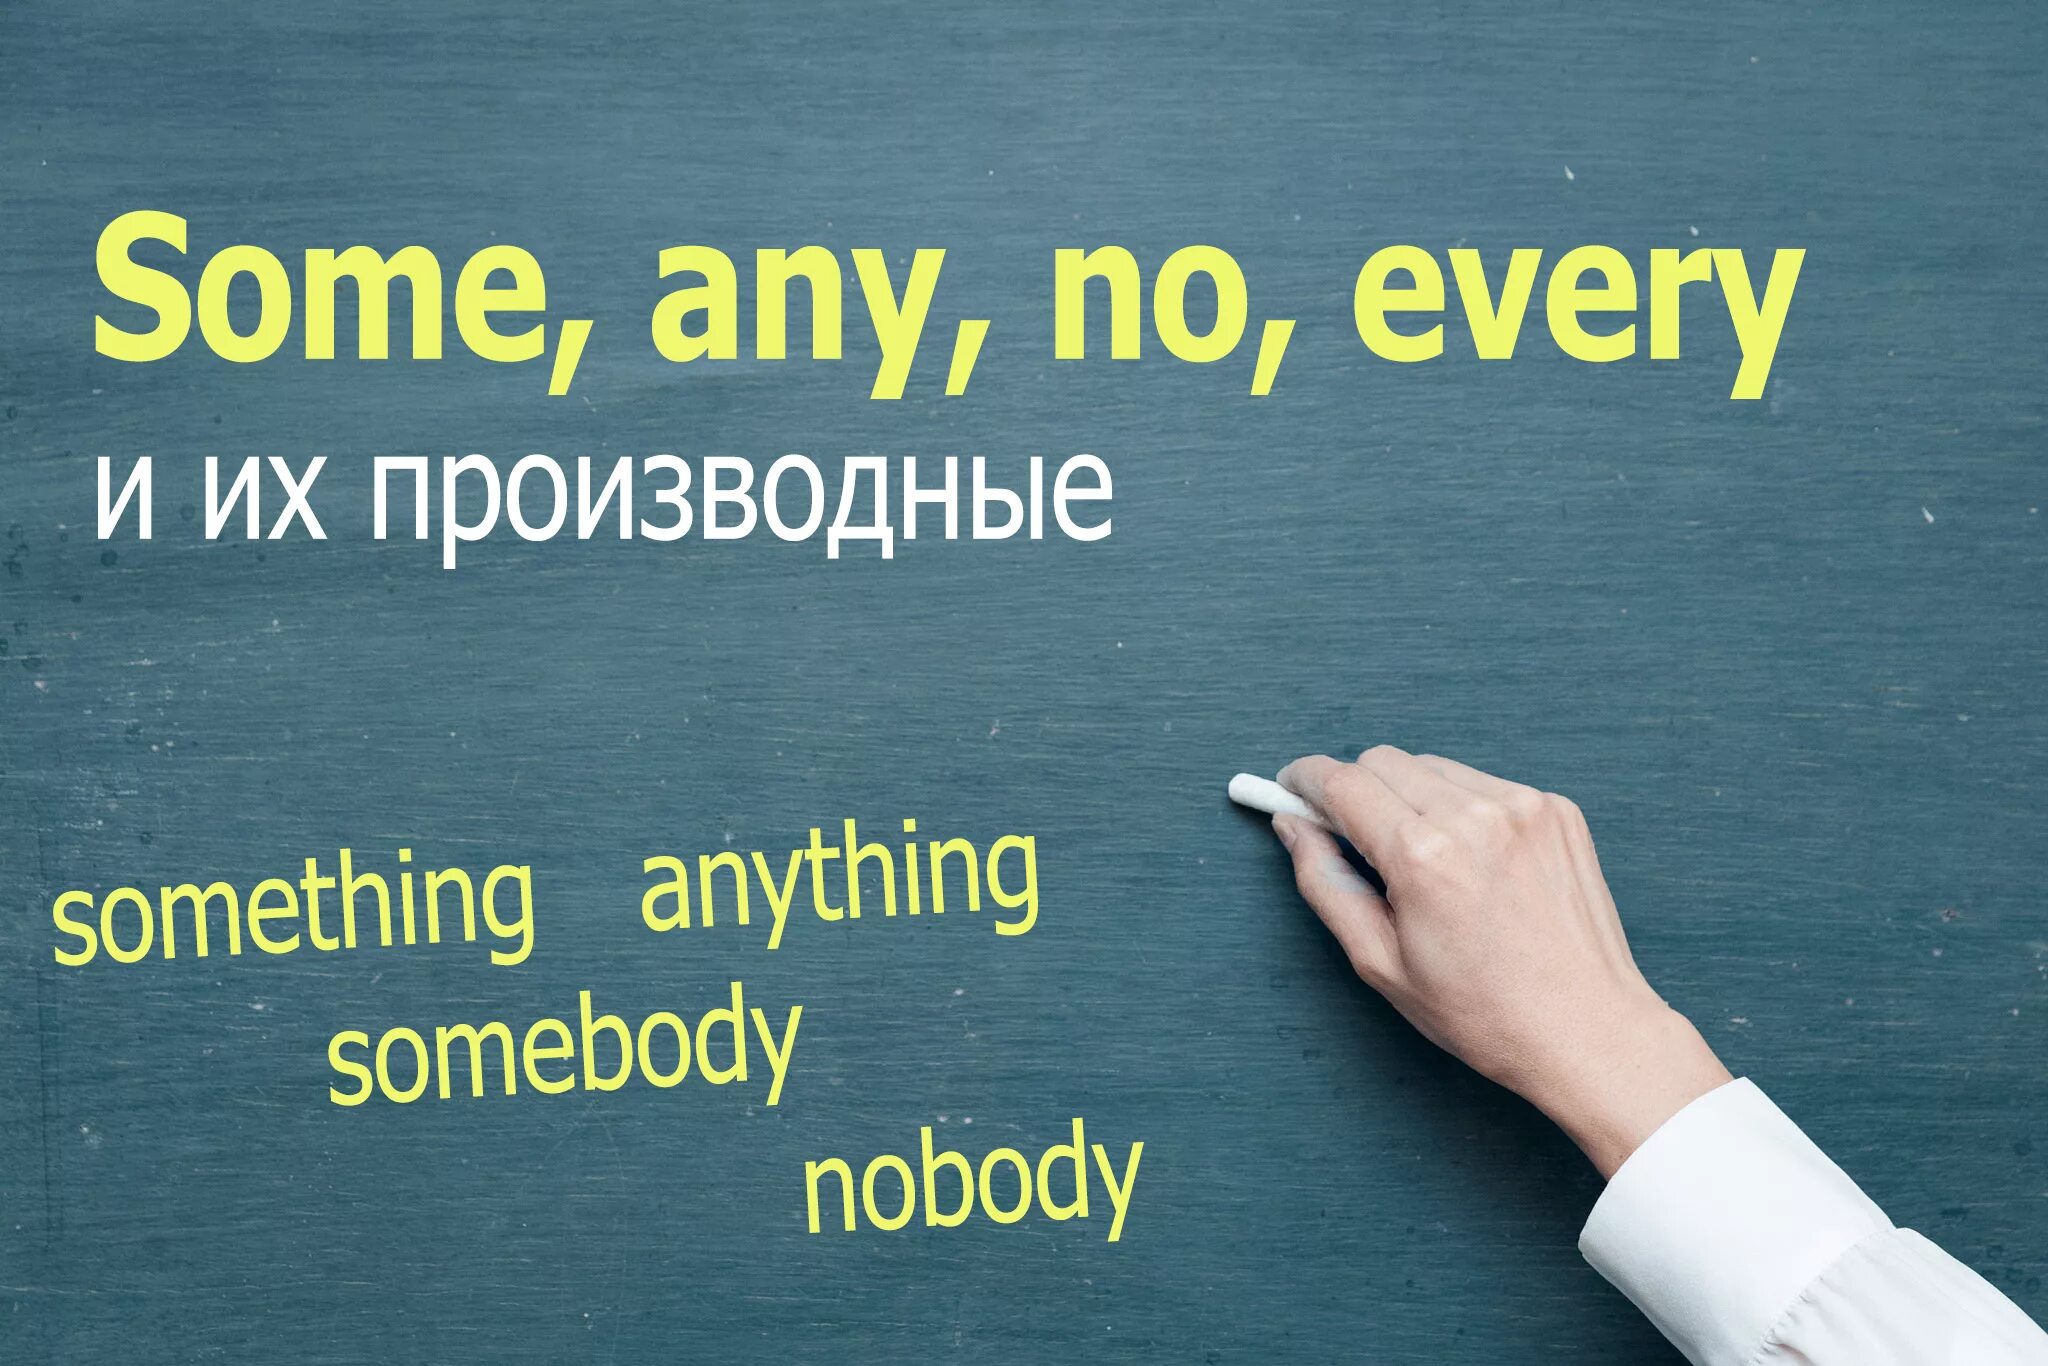 Something for everyone. Some any every правило. Местоимения some any no every. Употребление some any no every. Some any no every правило.